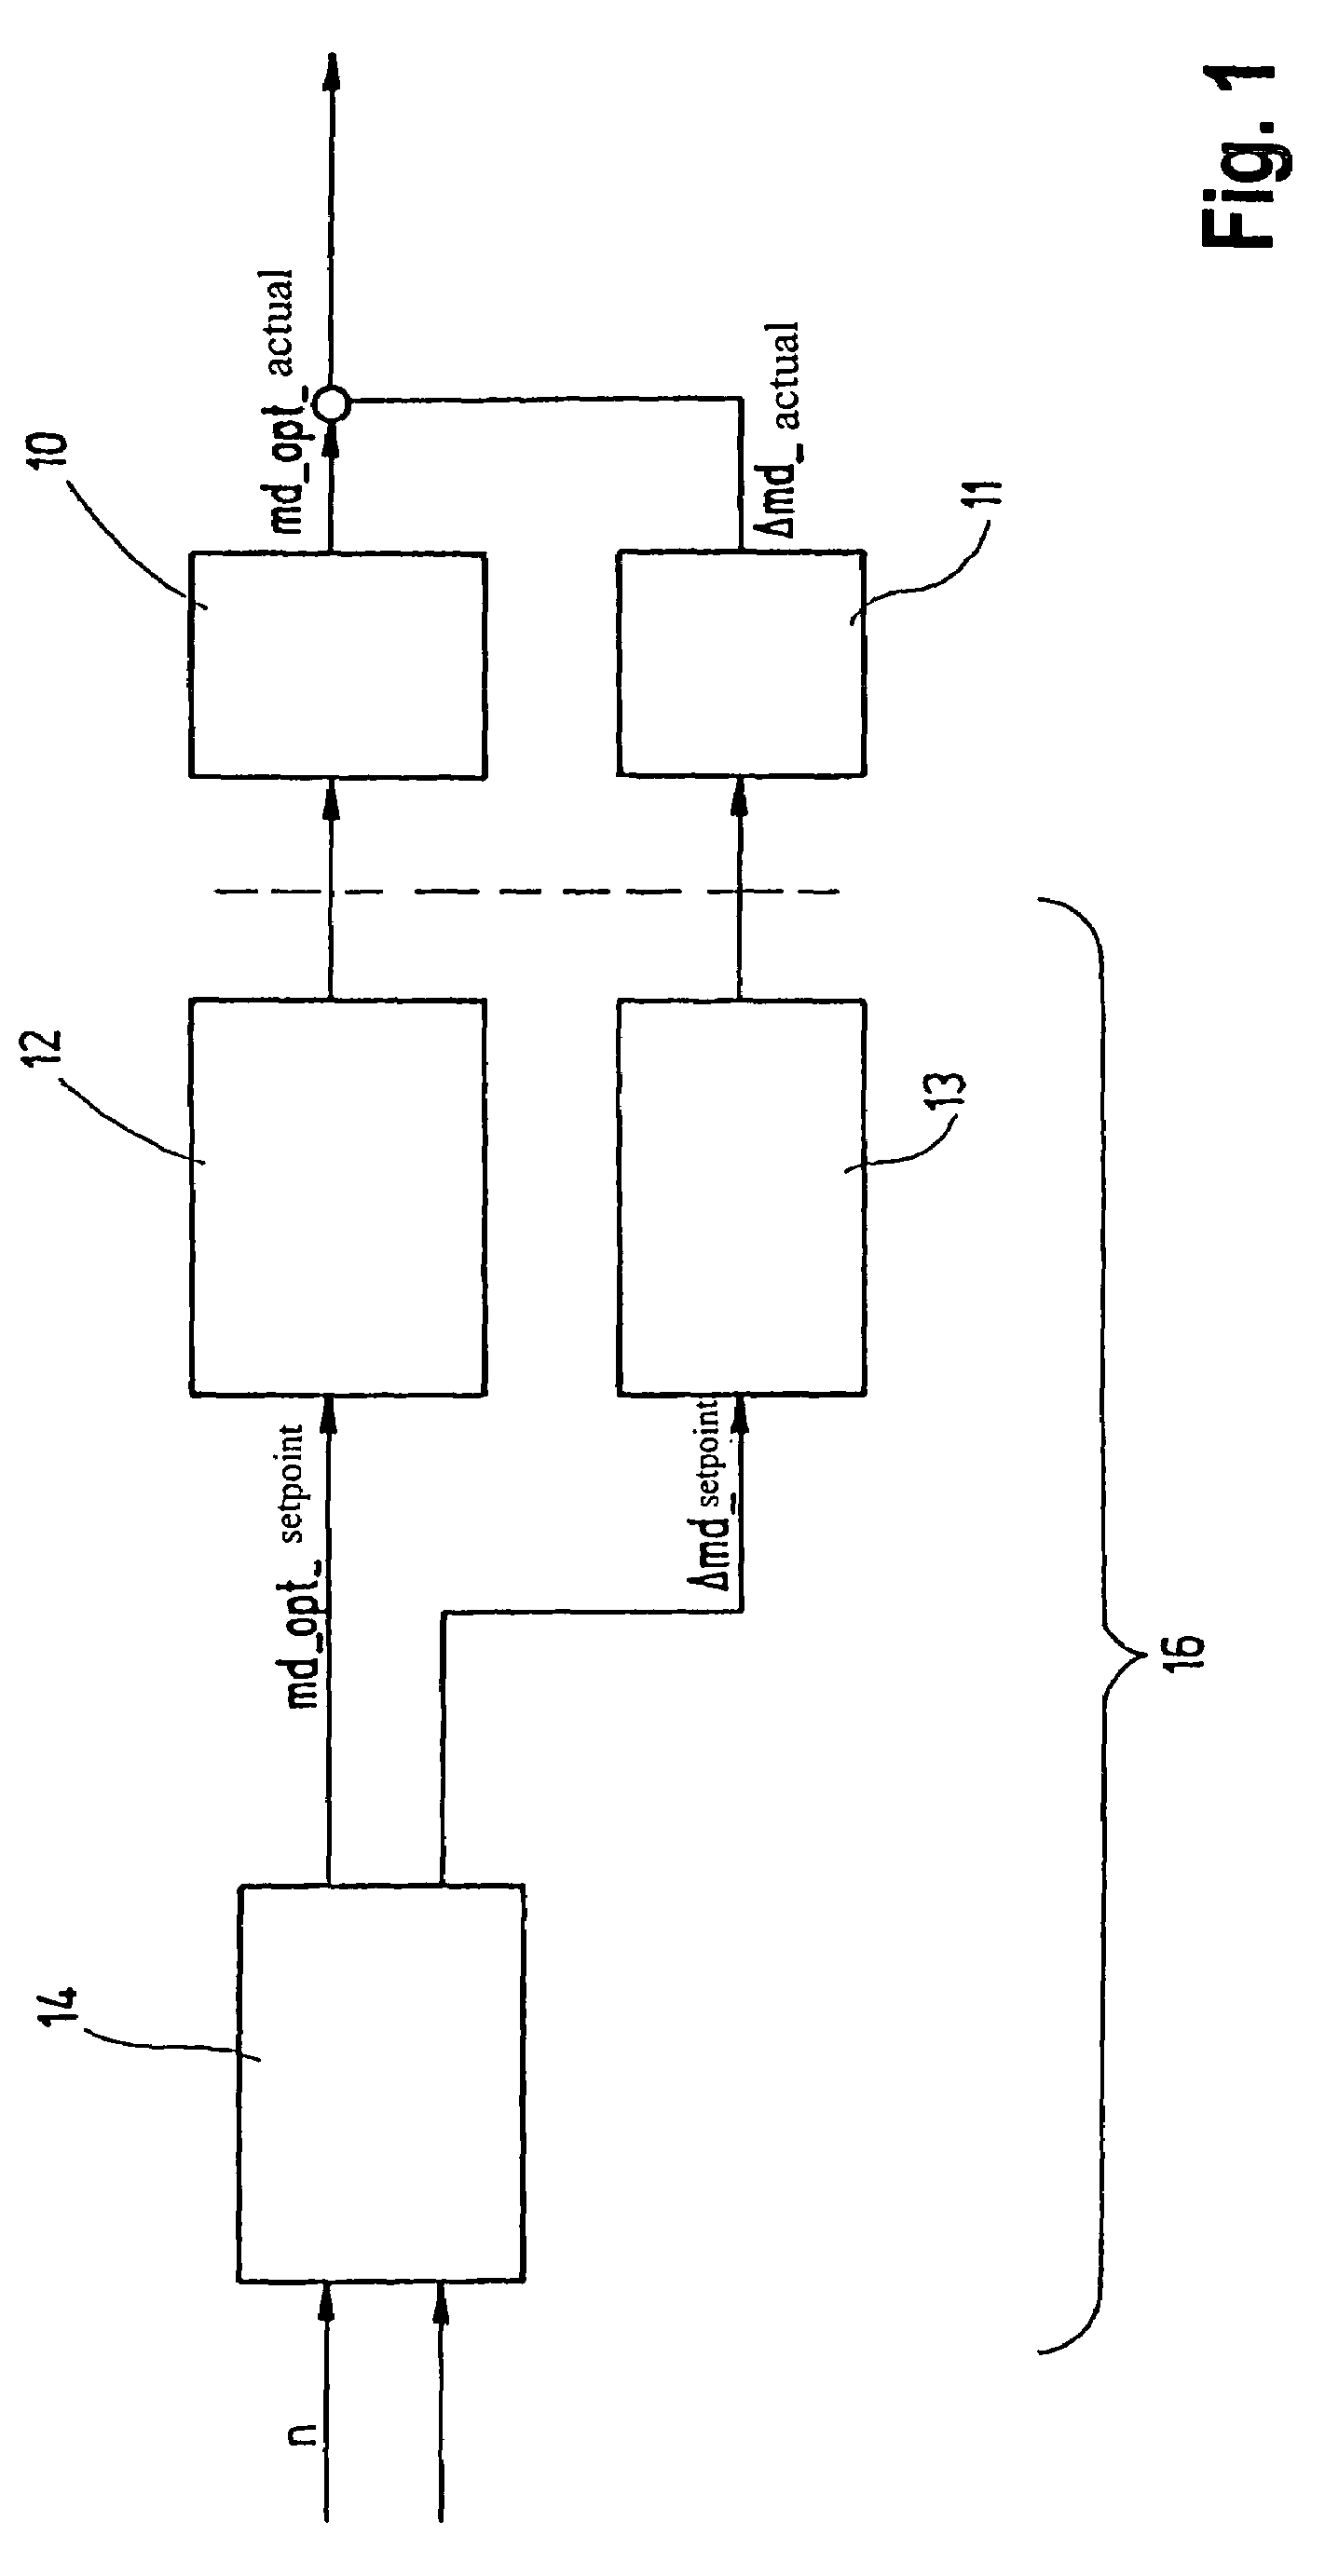 Method of and apparatus for operating a drive train with an electrical machine